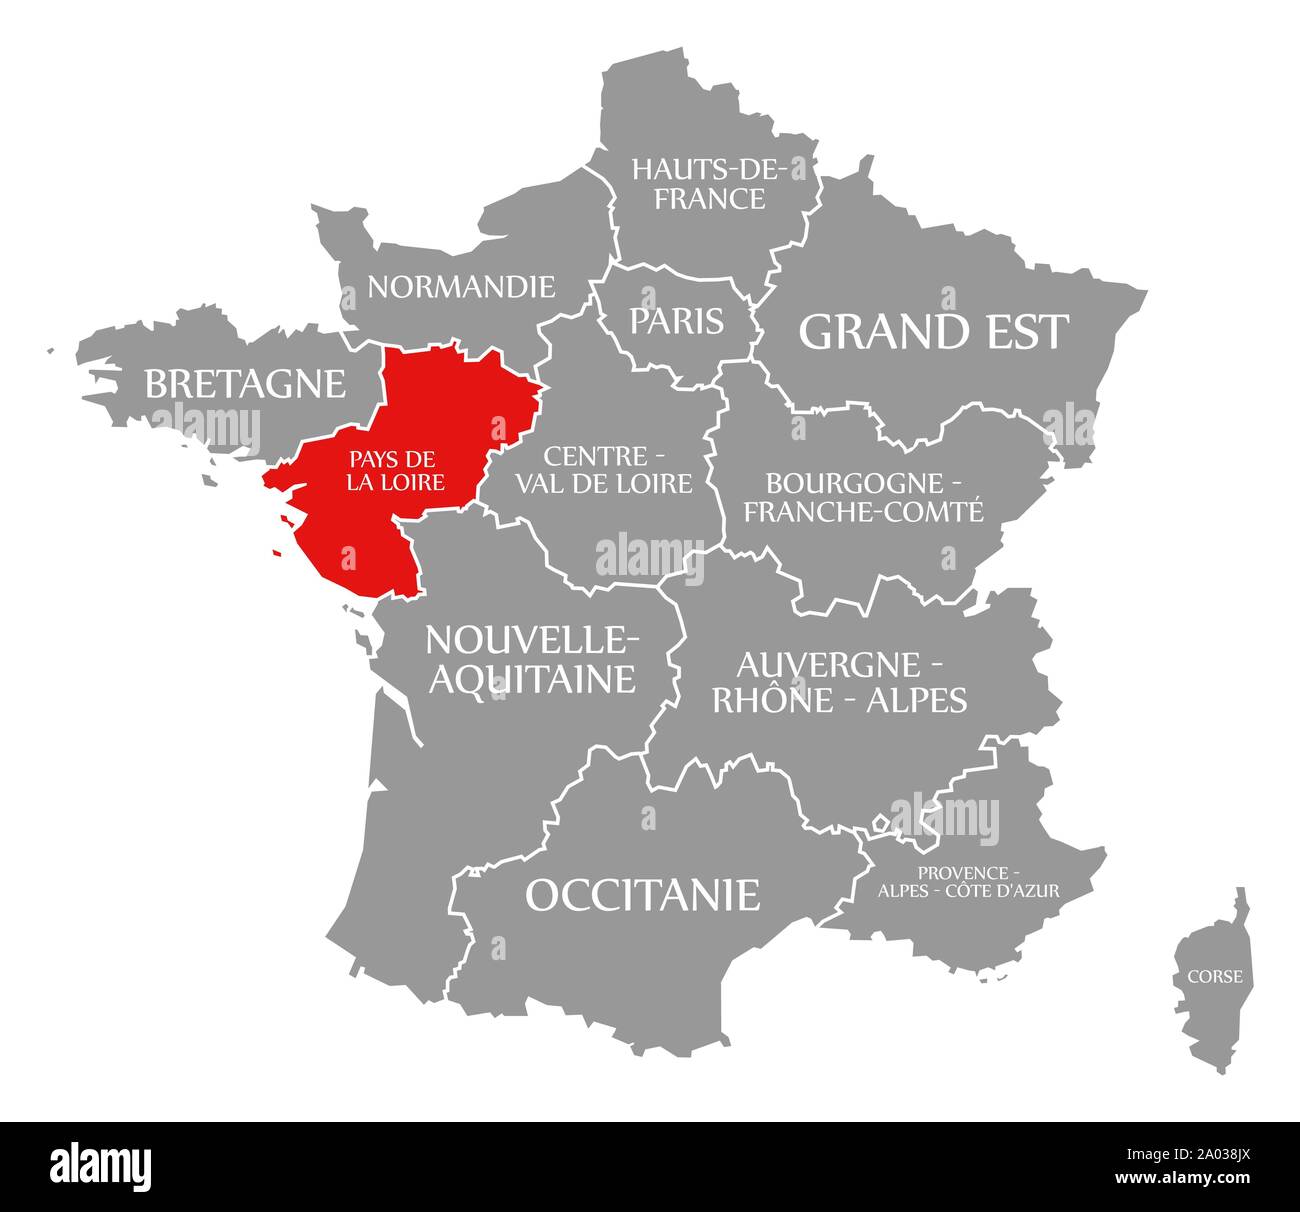 Pays de la Loire red highlighted in map of France Stock Photo